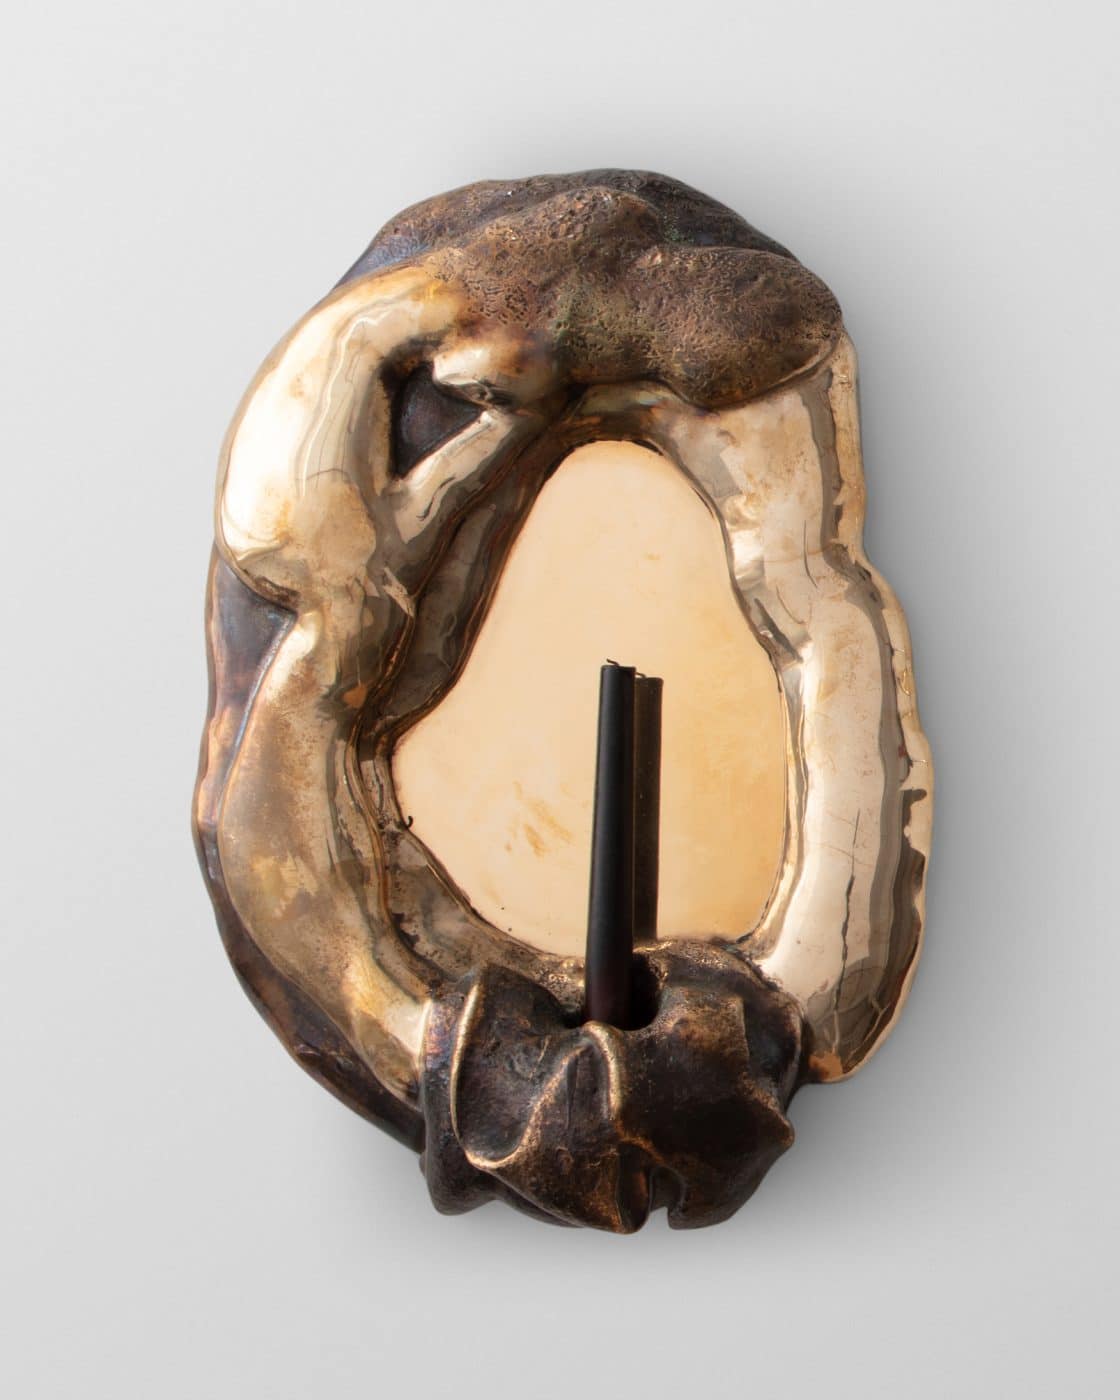 A Rogan Gregory mirror in bronze and glass that also acts as a sconce, holding a single candle